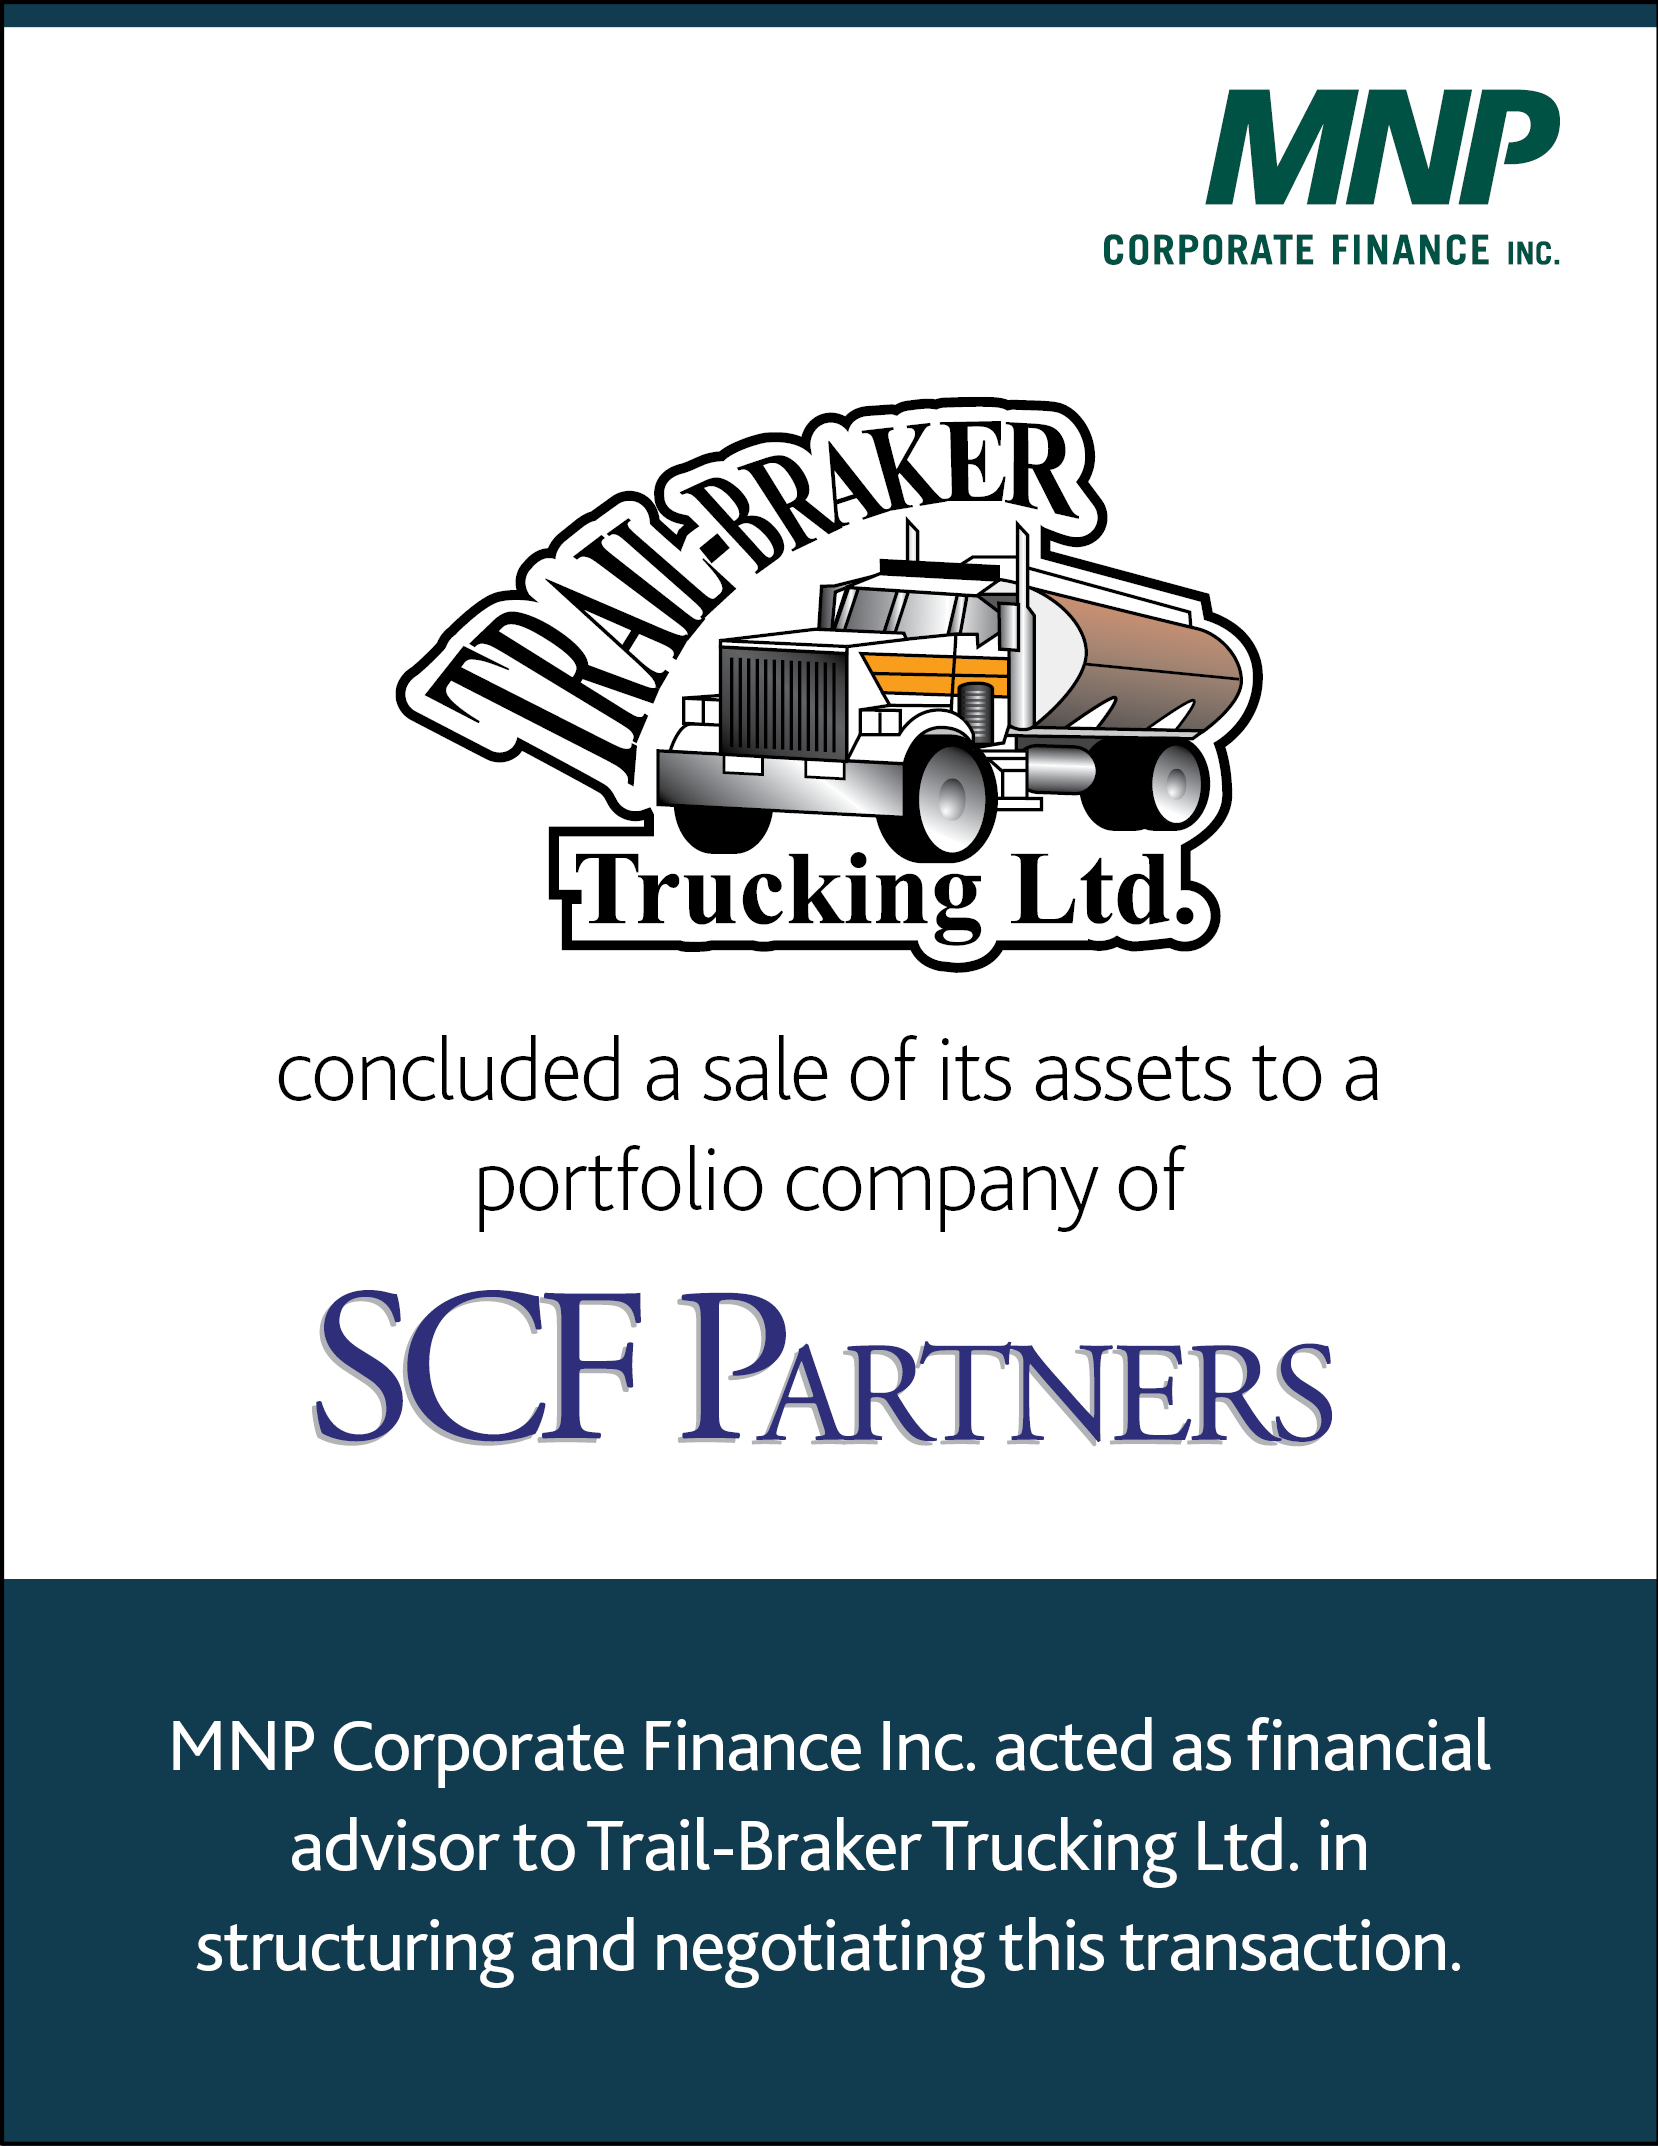 Trail-Braker Trucking Ltd concluded a sale of its assets to a portfolio company of SCF Partners